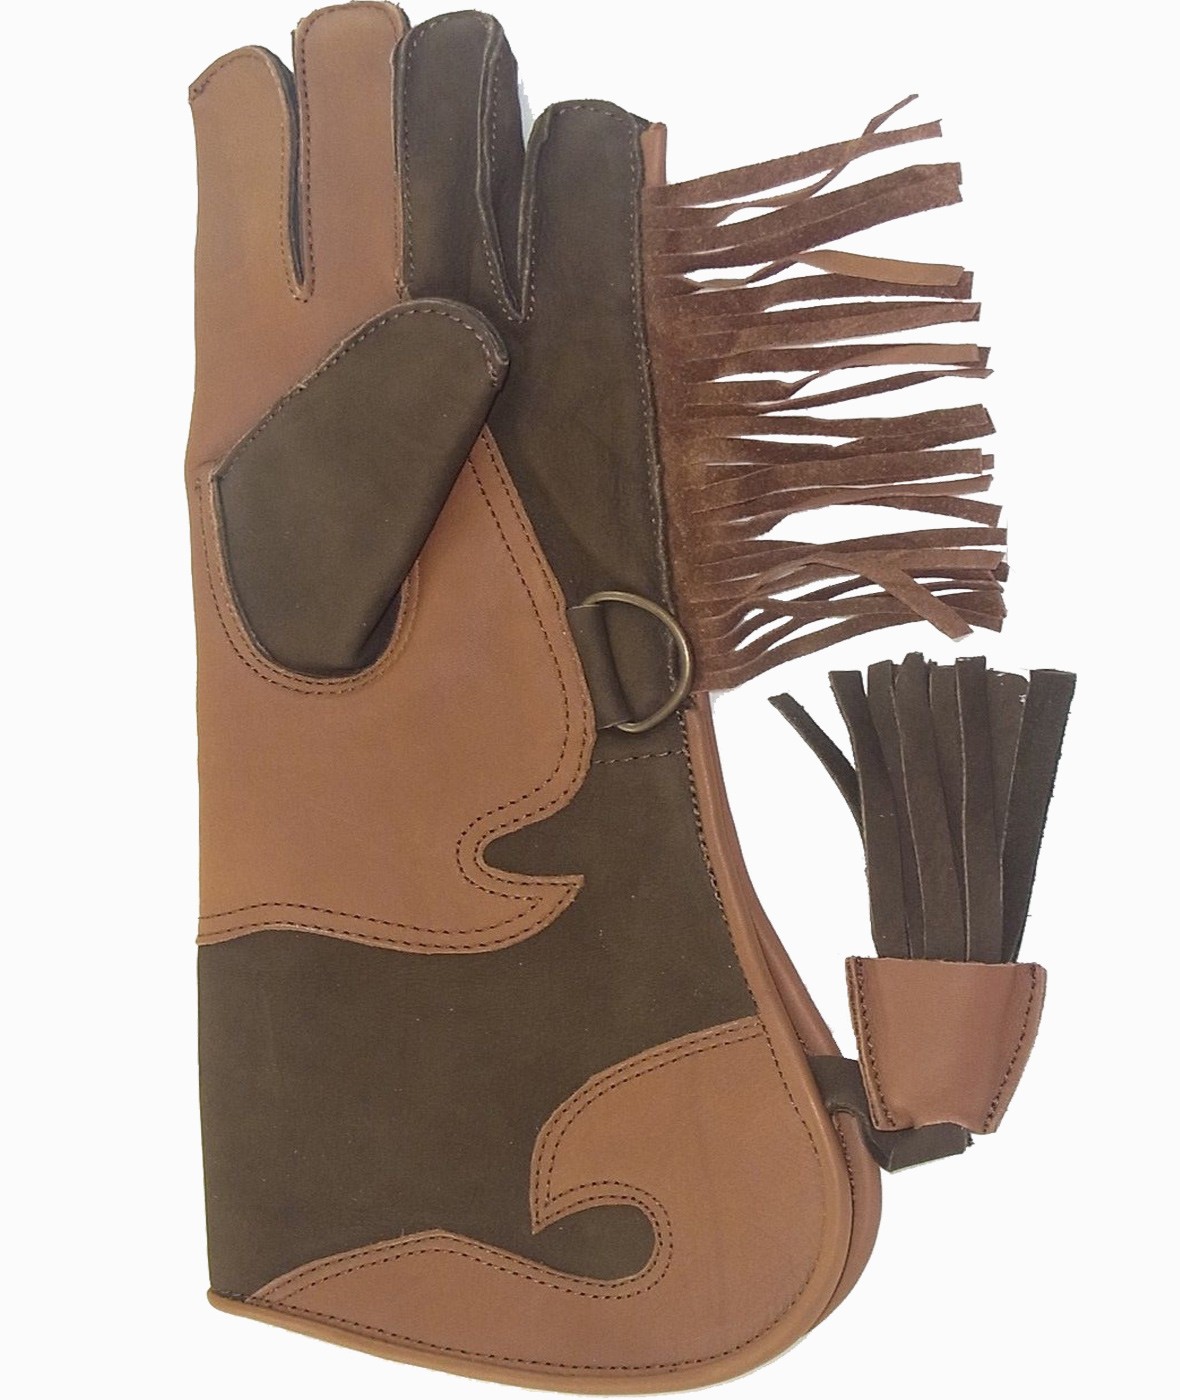 Children's Falconry Glove Long Cuff Chocolate & Tan double skinned 